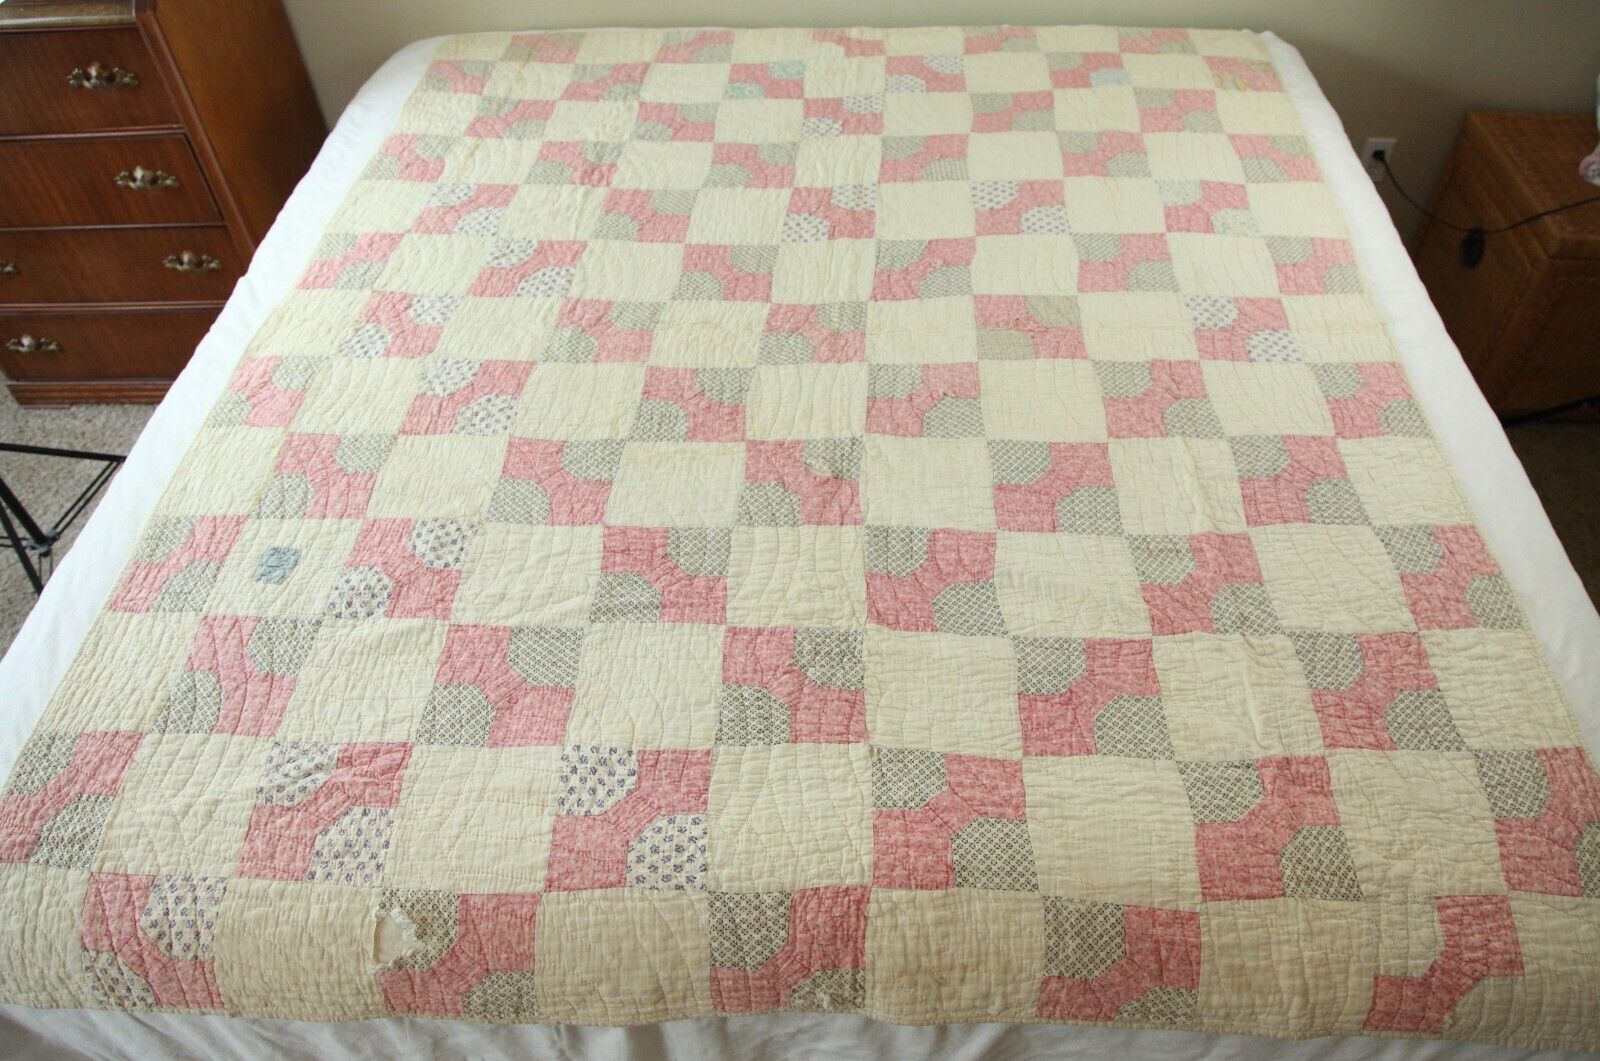 FLAWS WEAR Antique Old Early Pink Calico Bowtie Quilt Baptist Circle Fan 80 x 66